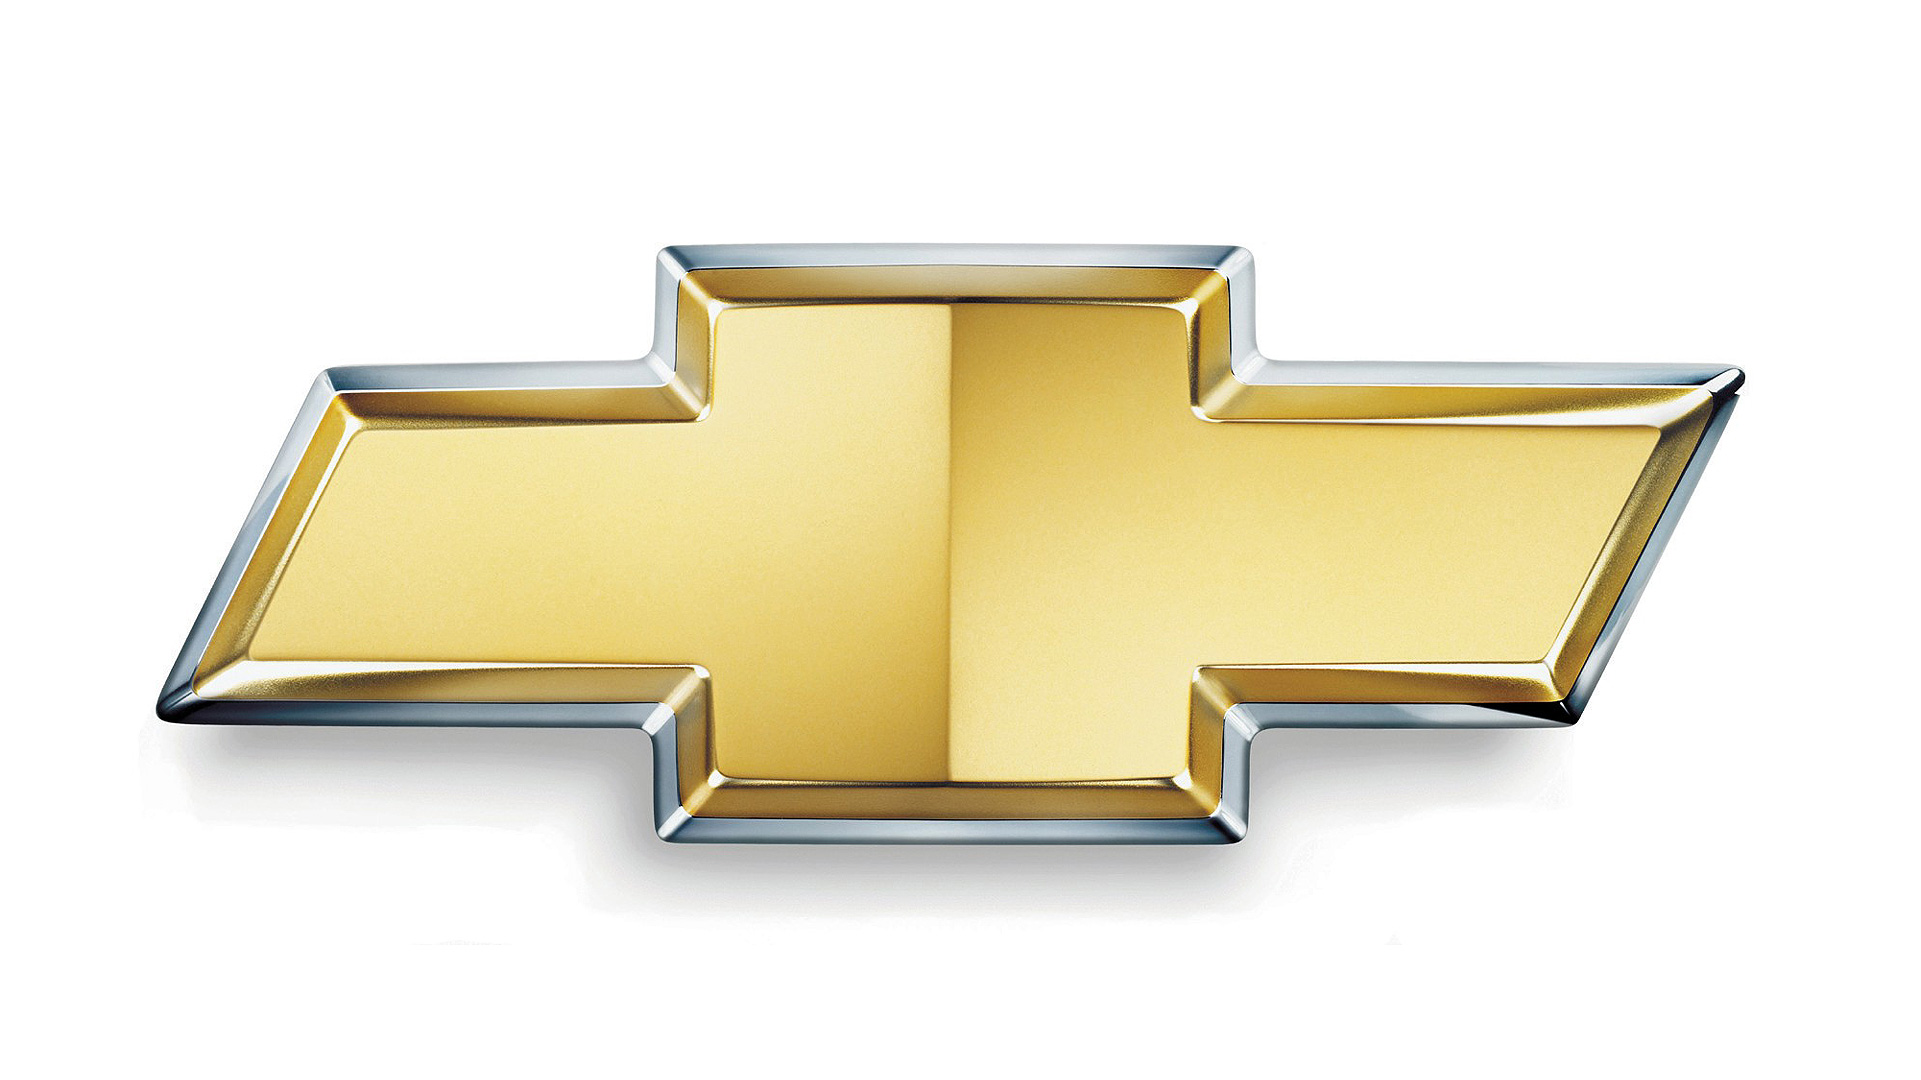 Chevrolet Logo, Hd Png, Meaning, Information - Chevrolet, Transparent background PNG HD thumbnail